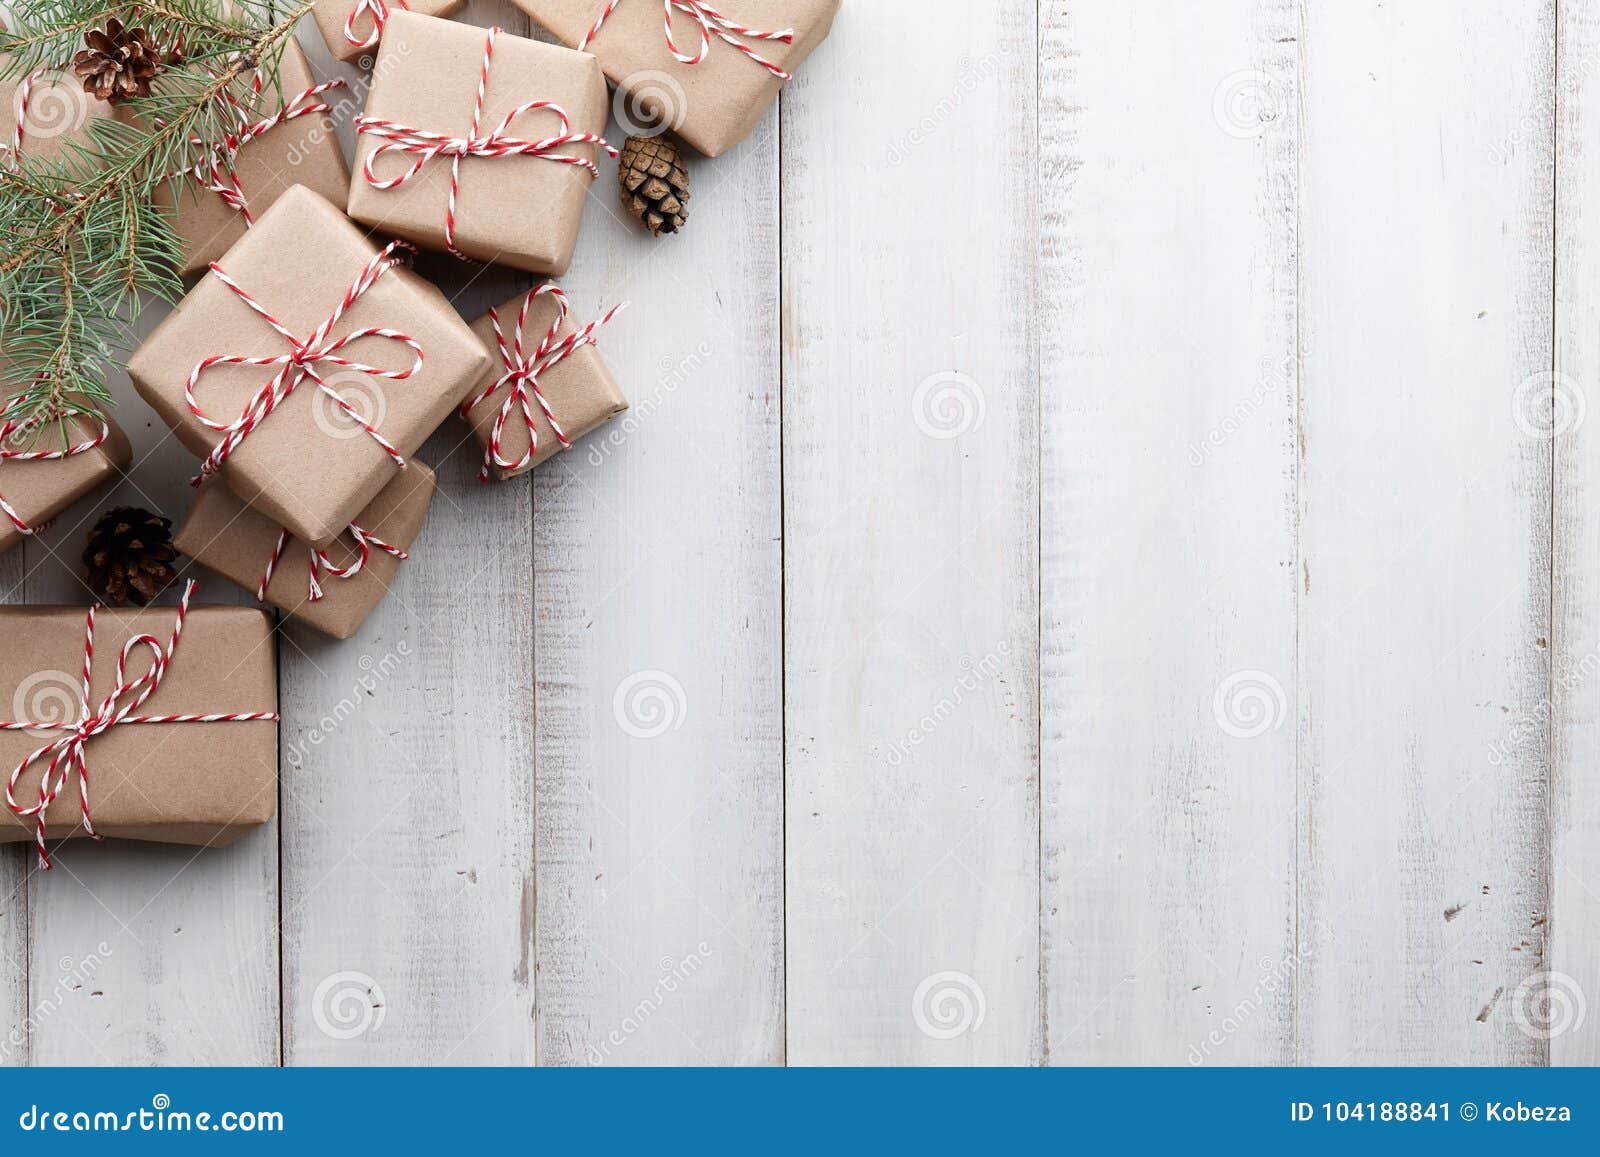 Plain Brown Paper Wrapped Christmas Presents Stock Image - Image of giving,  star: 113592615